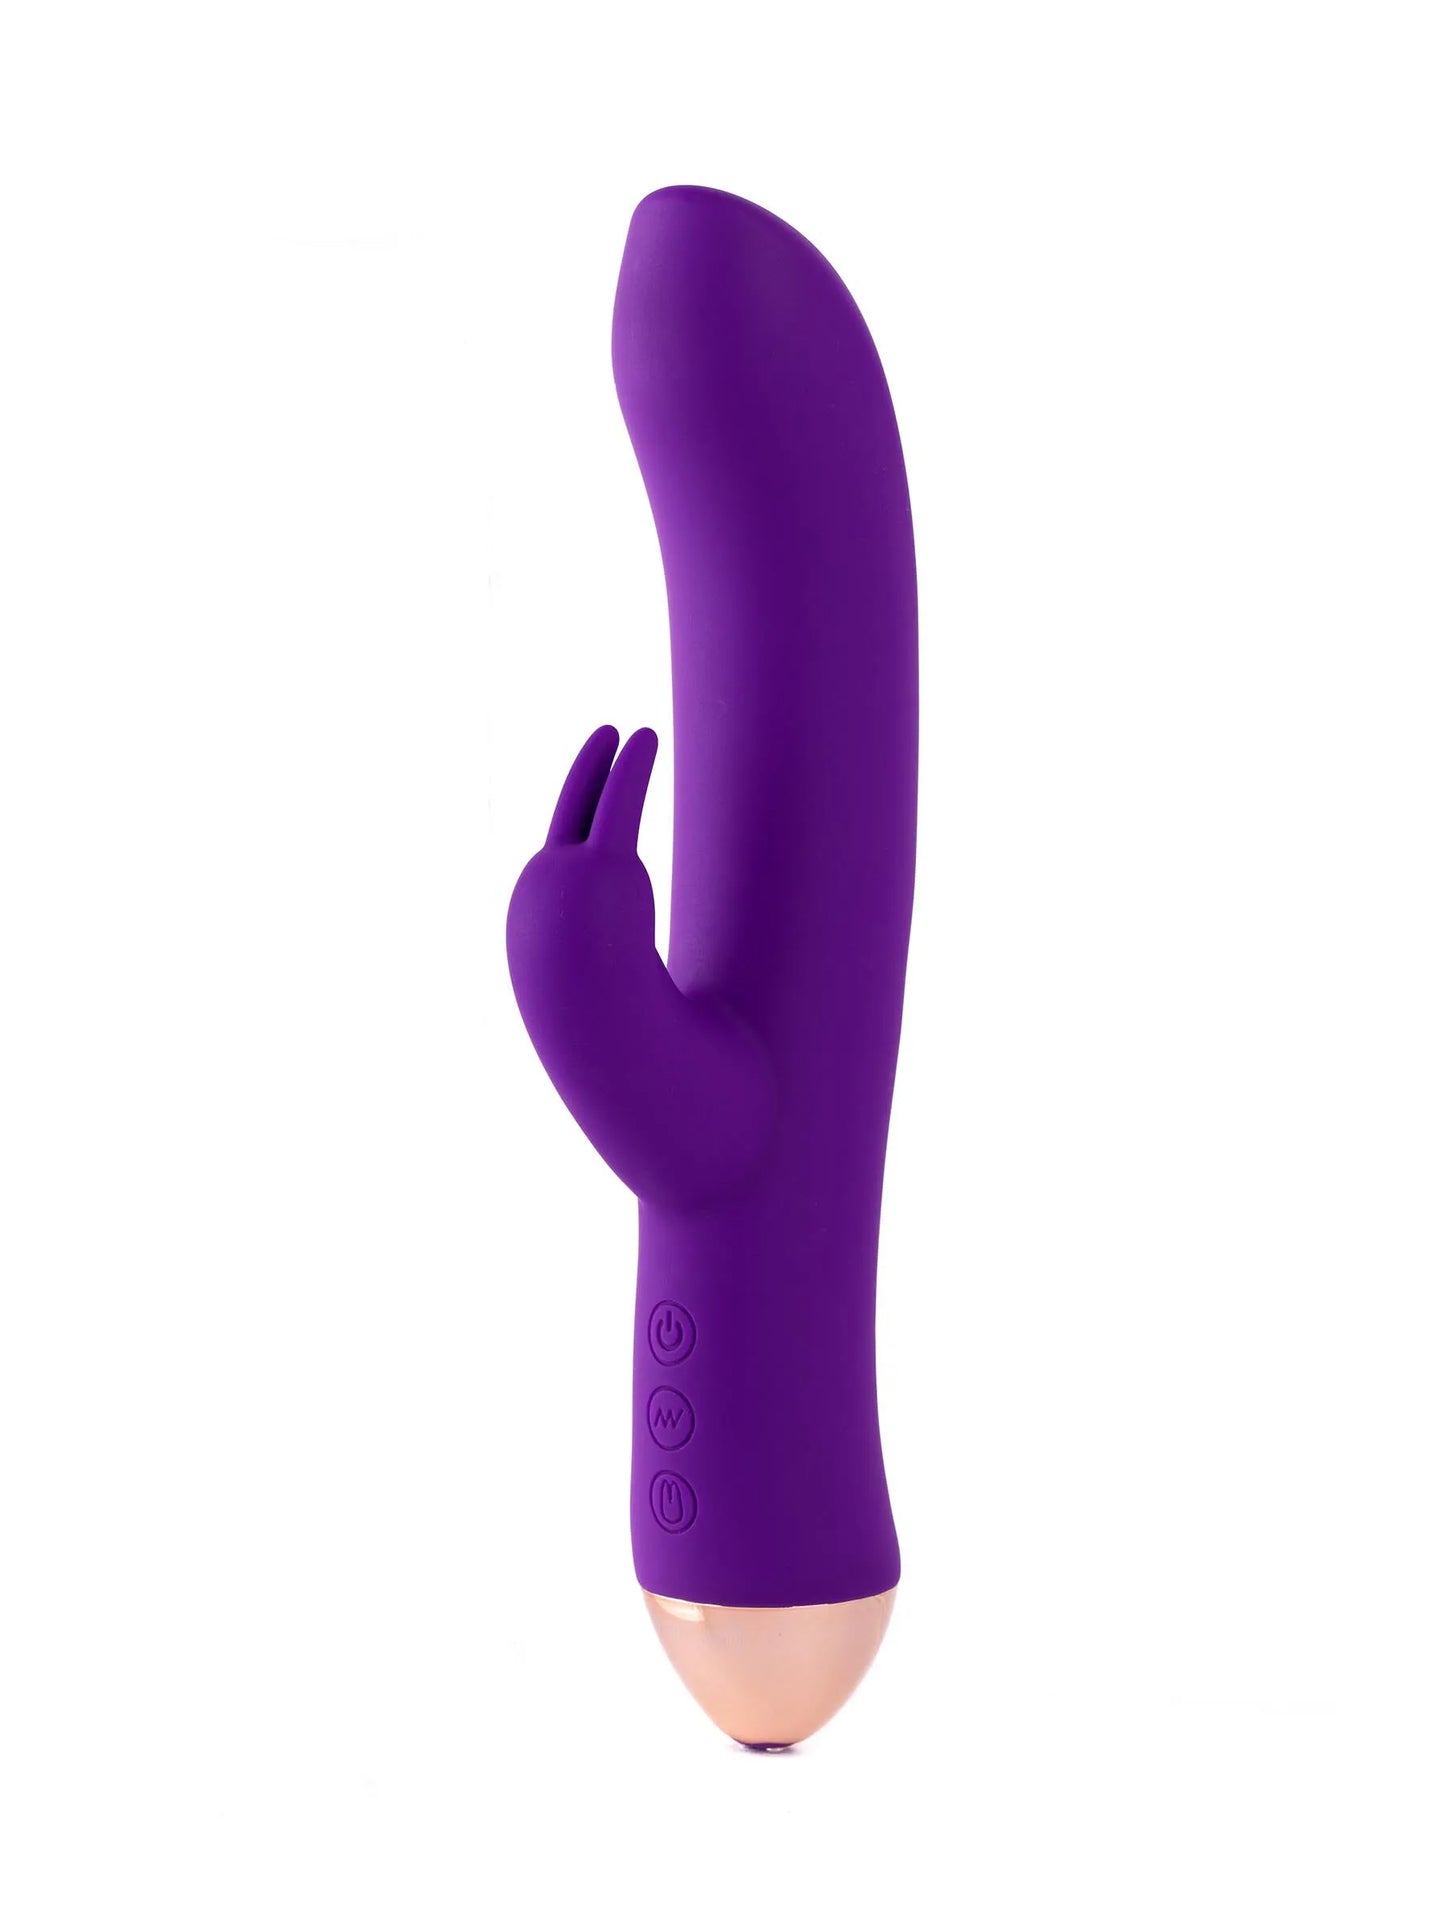 Moregasm Boost Rabbit From Ann Summers, Image 0